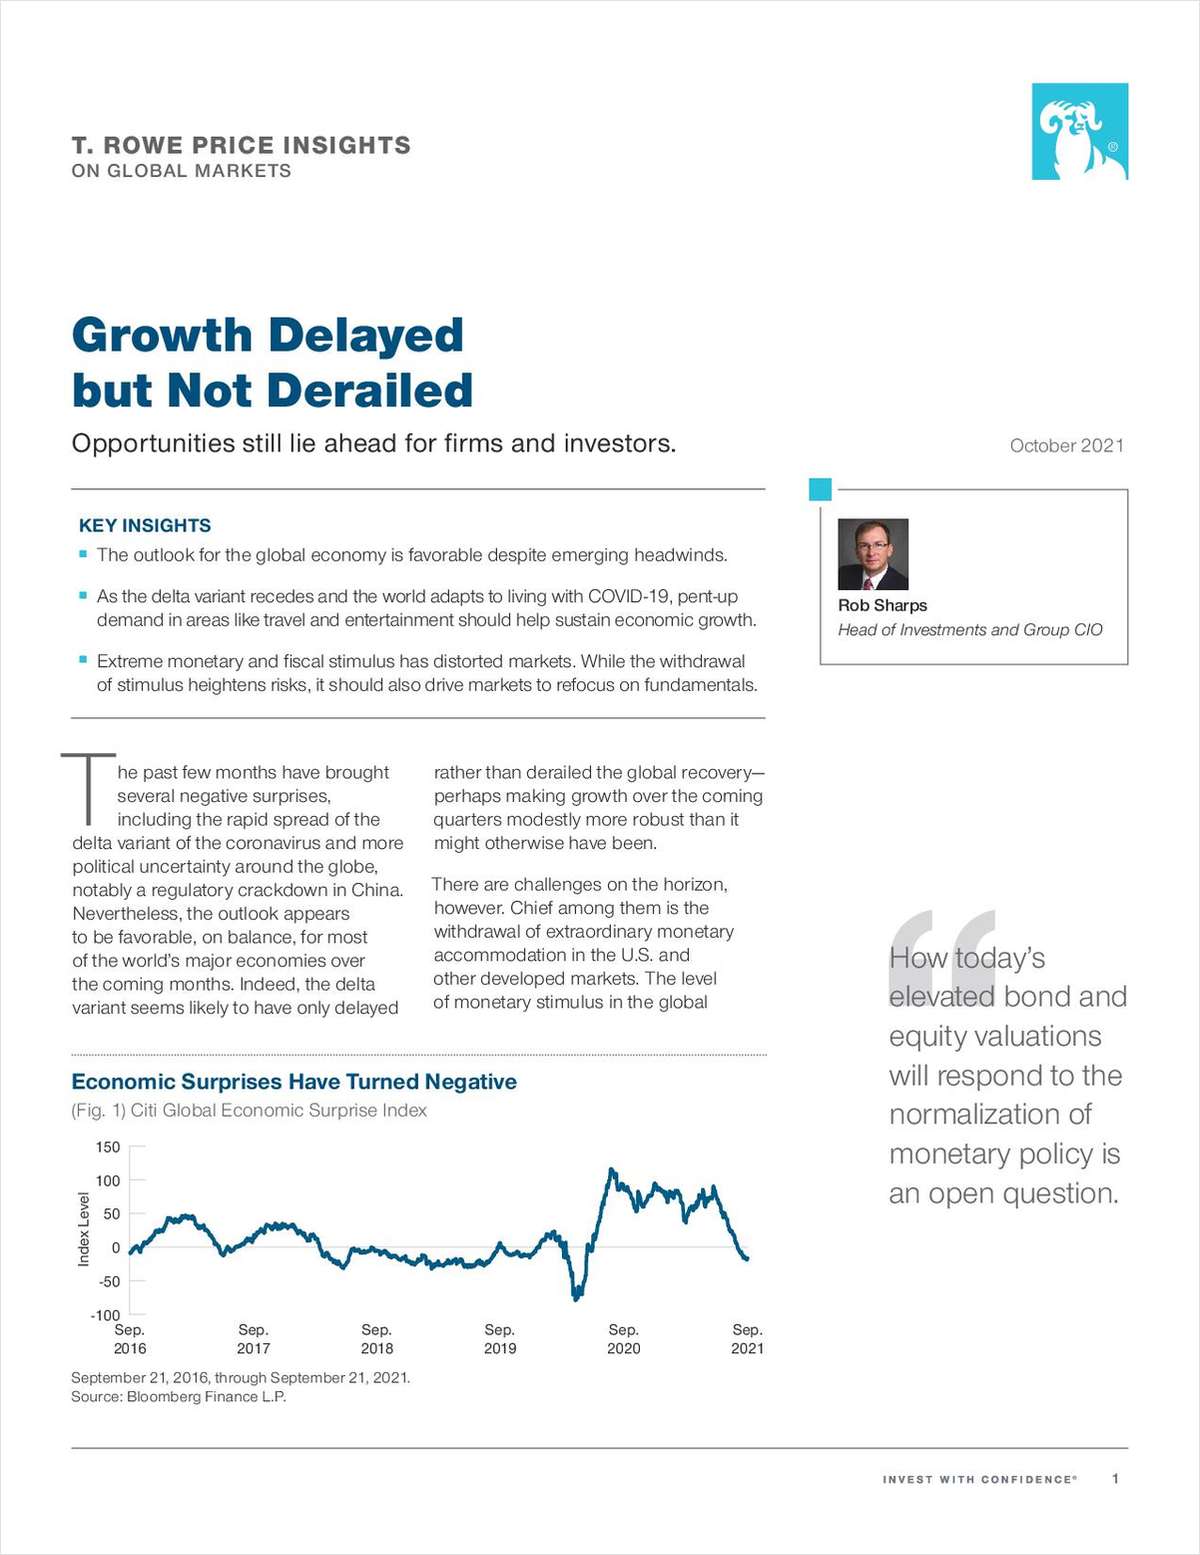 Growth Delayed but Not Derailed